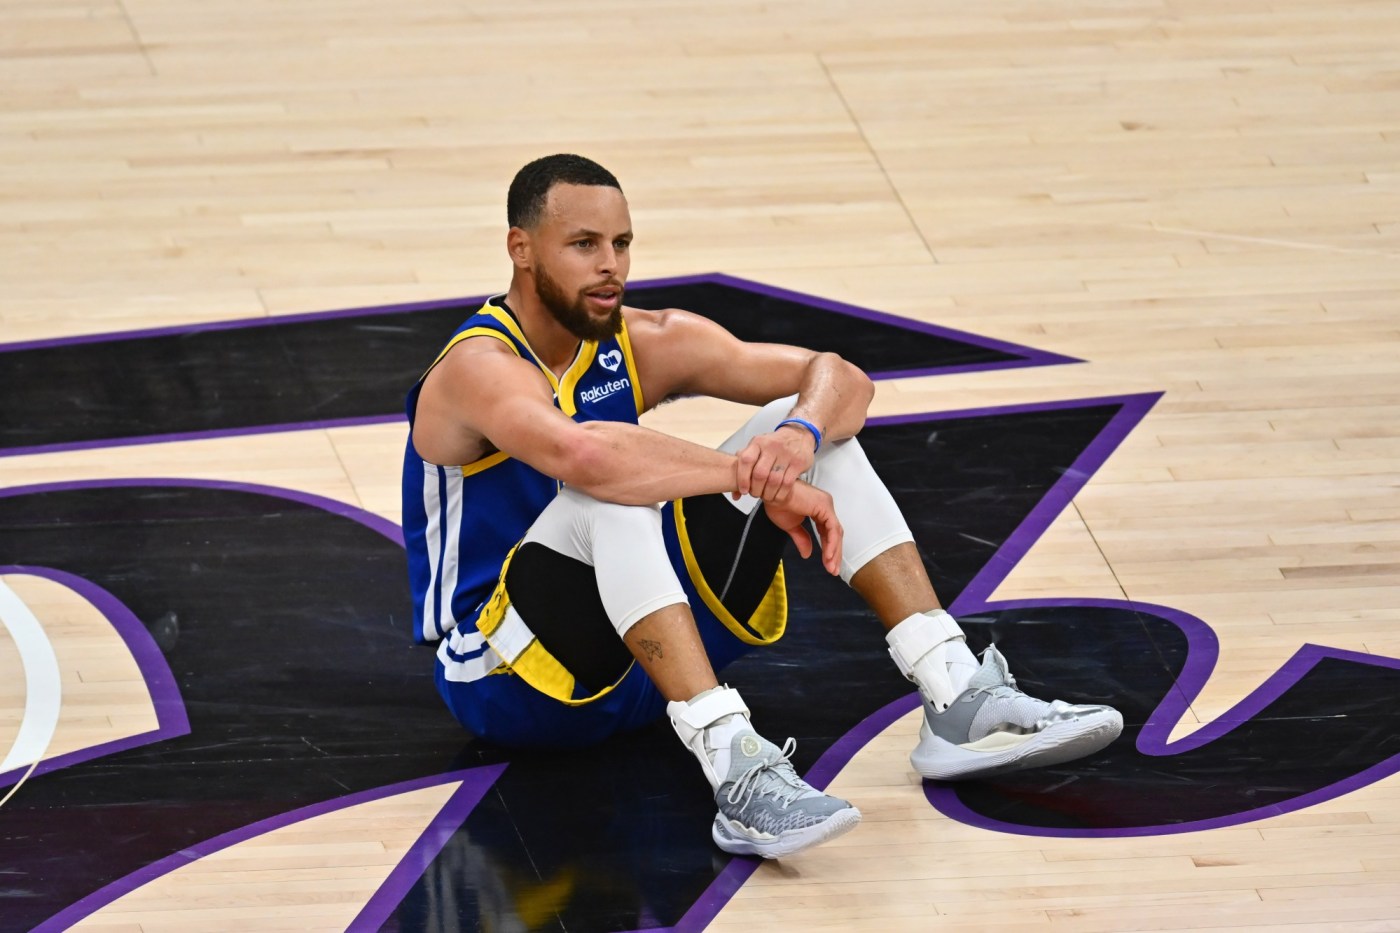 warriors’-season-ends-unceremoniously-with-blowout-loss-to-kings-in-play-in